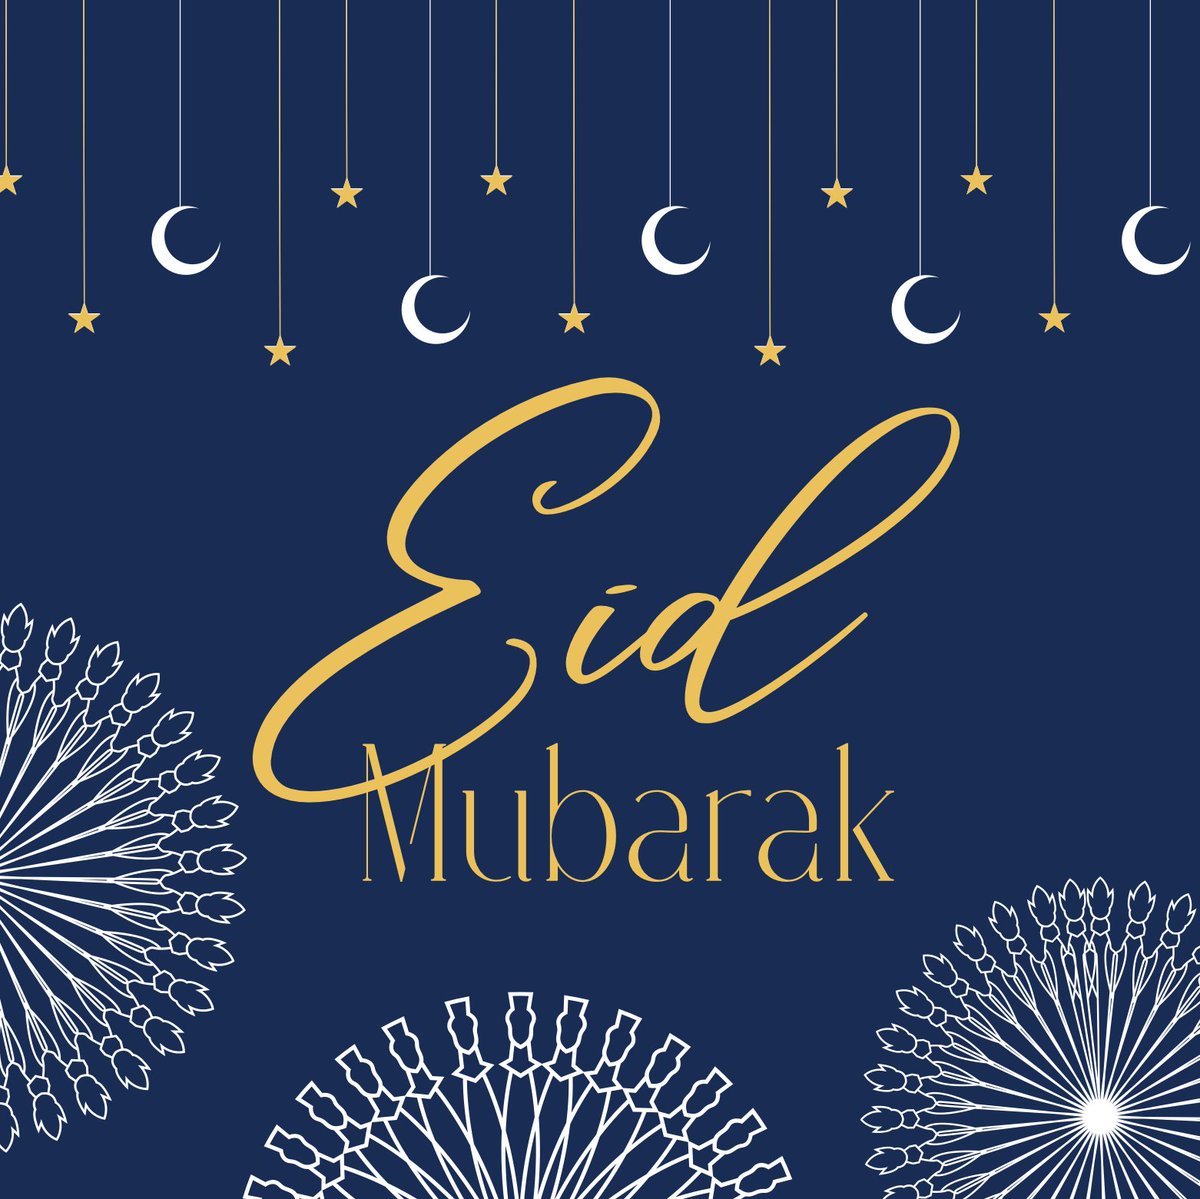 We wish a very happy Eid to all who are celebrating!